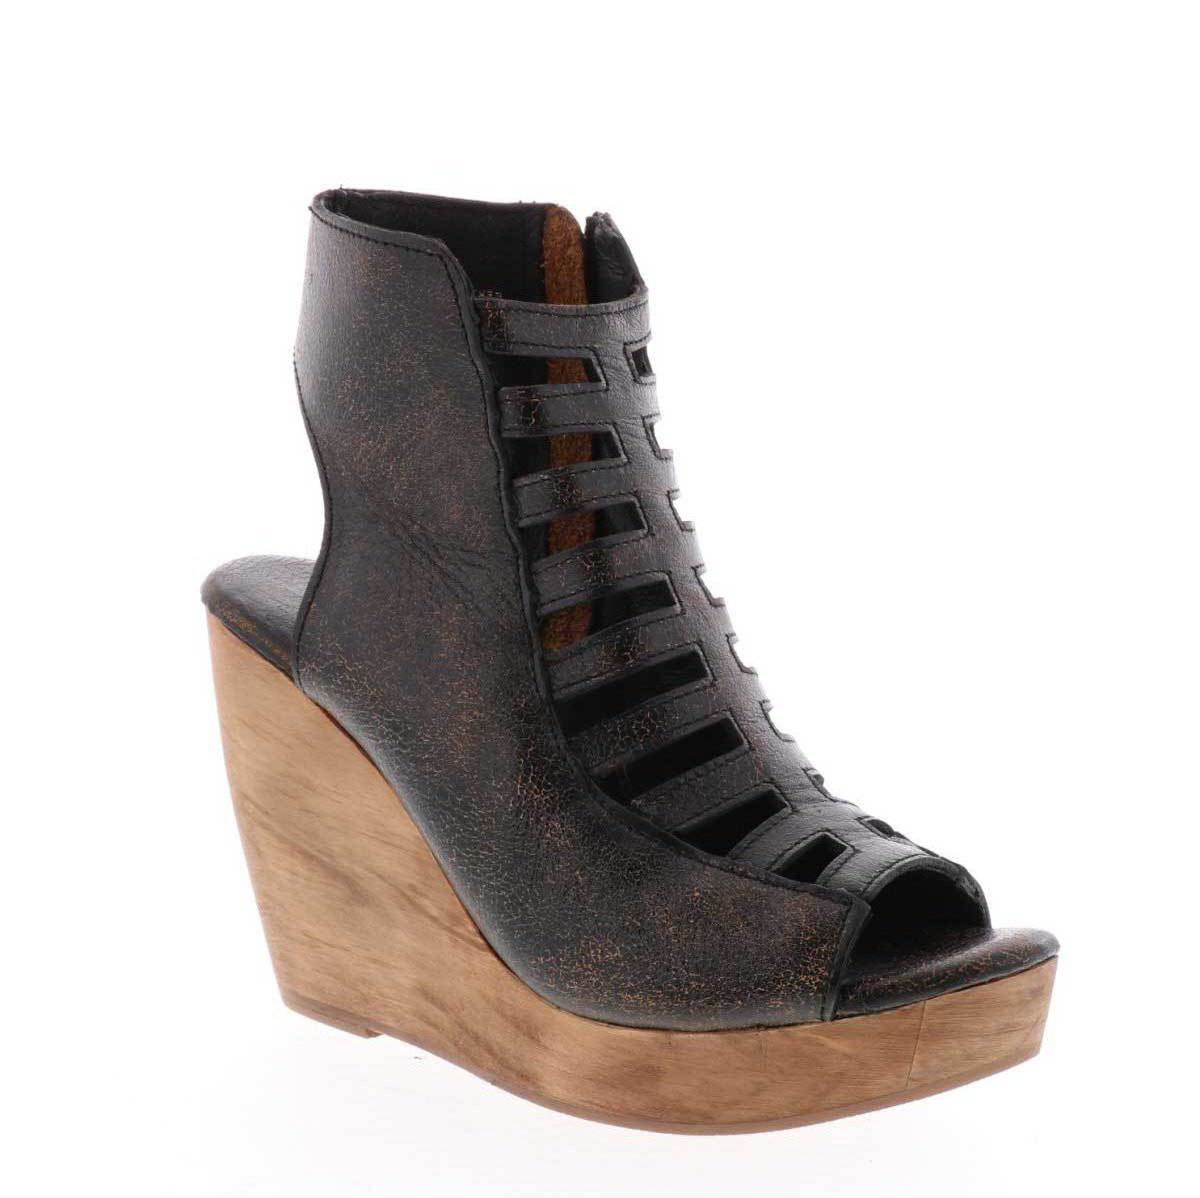 Volatile Shoes - Very Volatile Anouk Wedge in Brown - Little Miss Muffin Children & Home